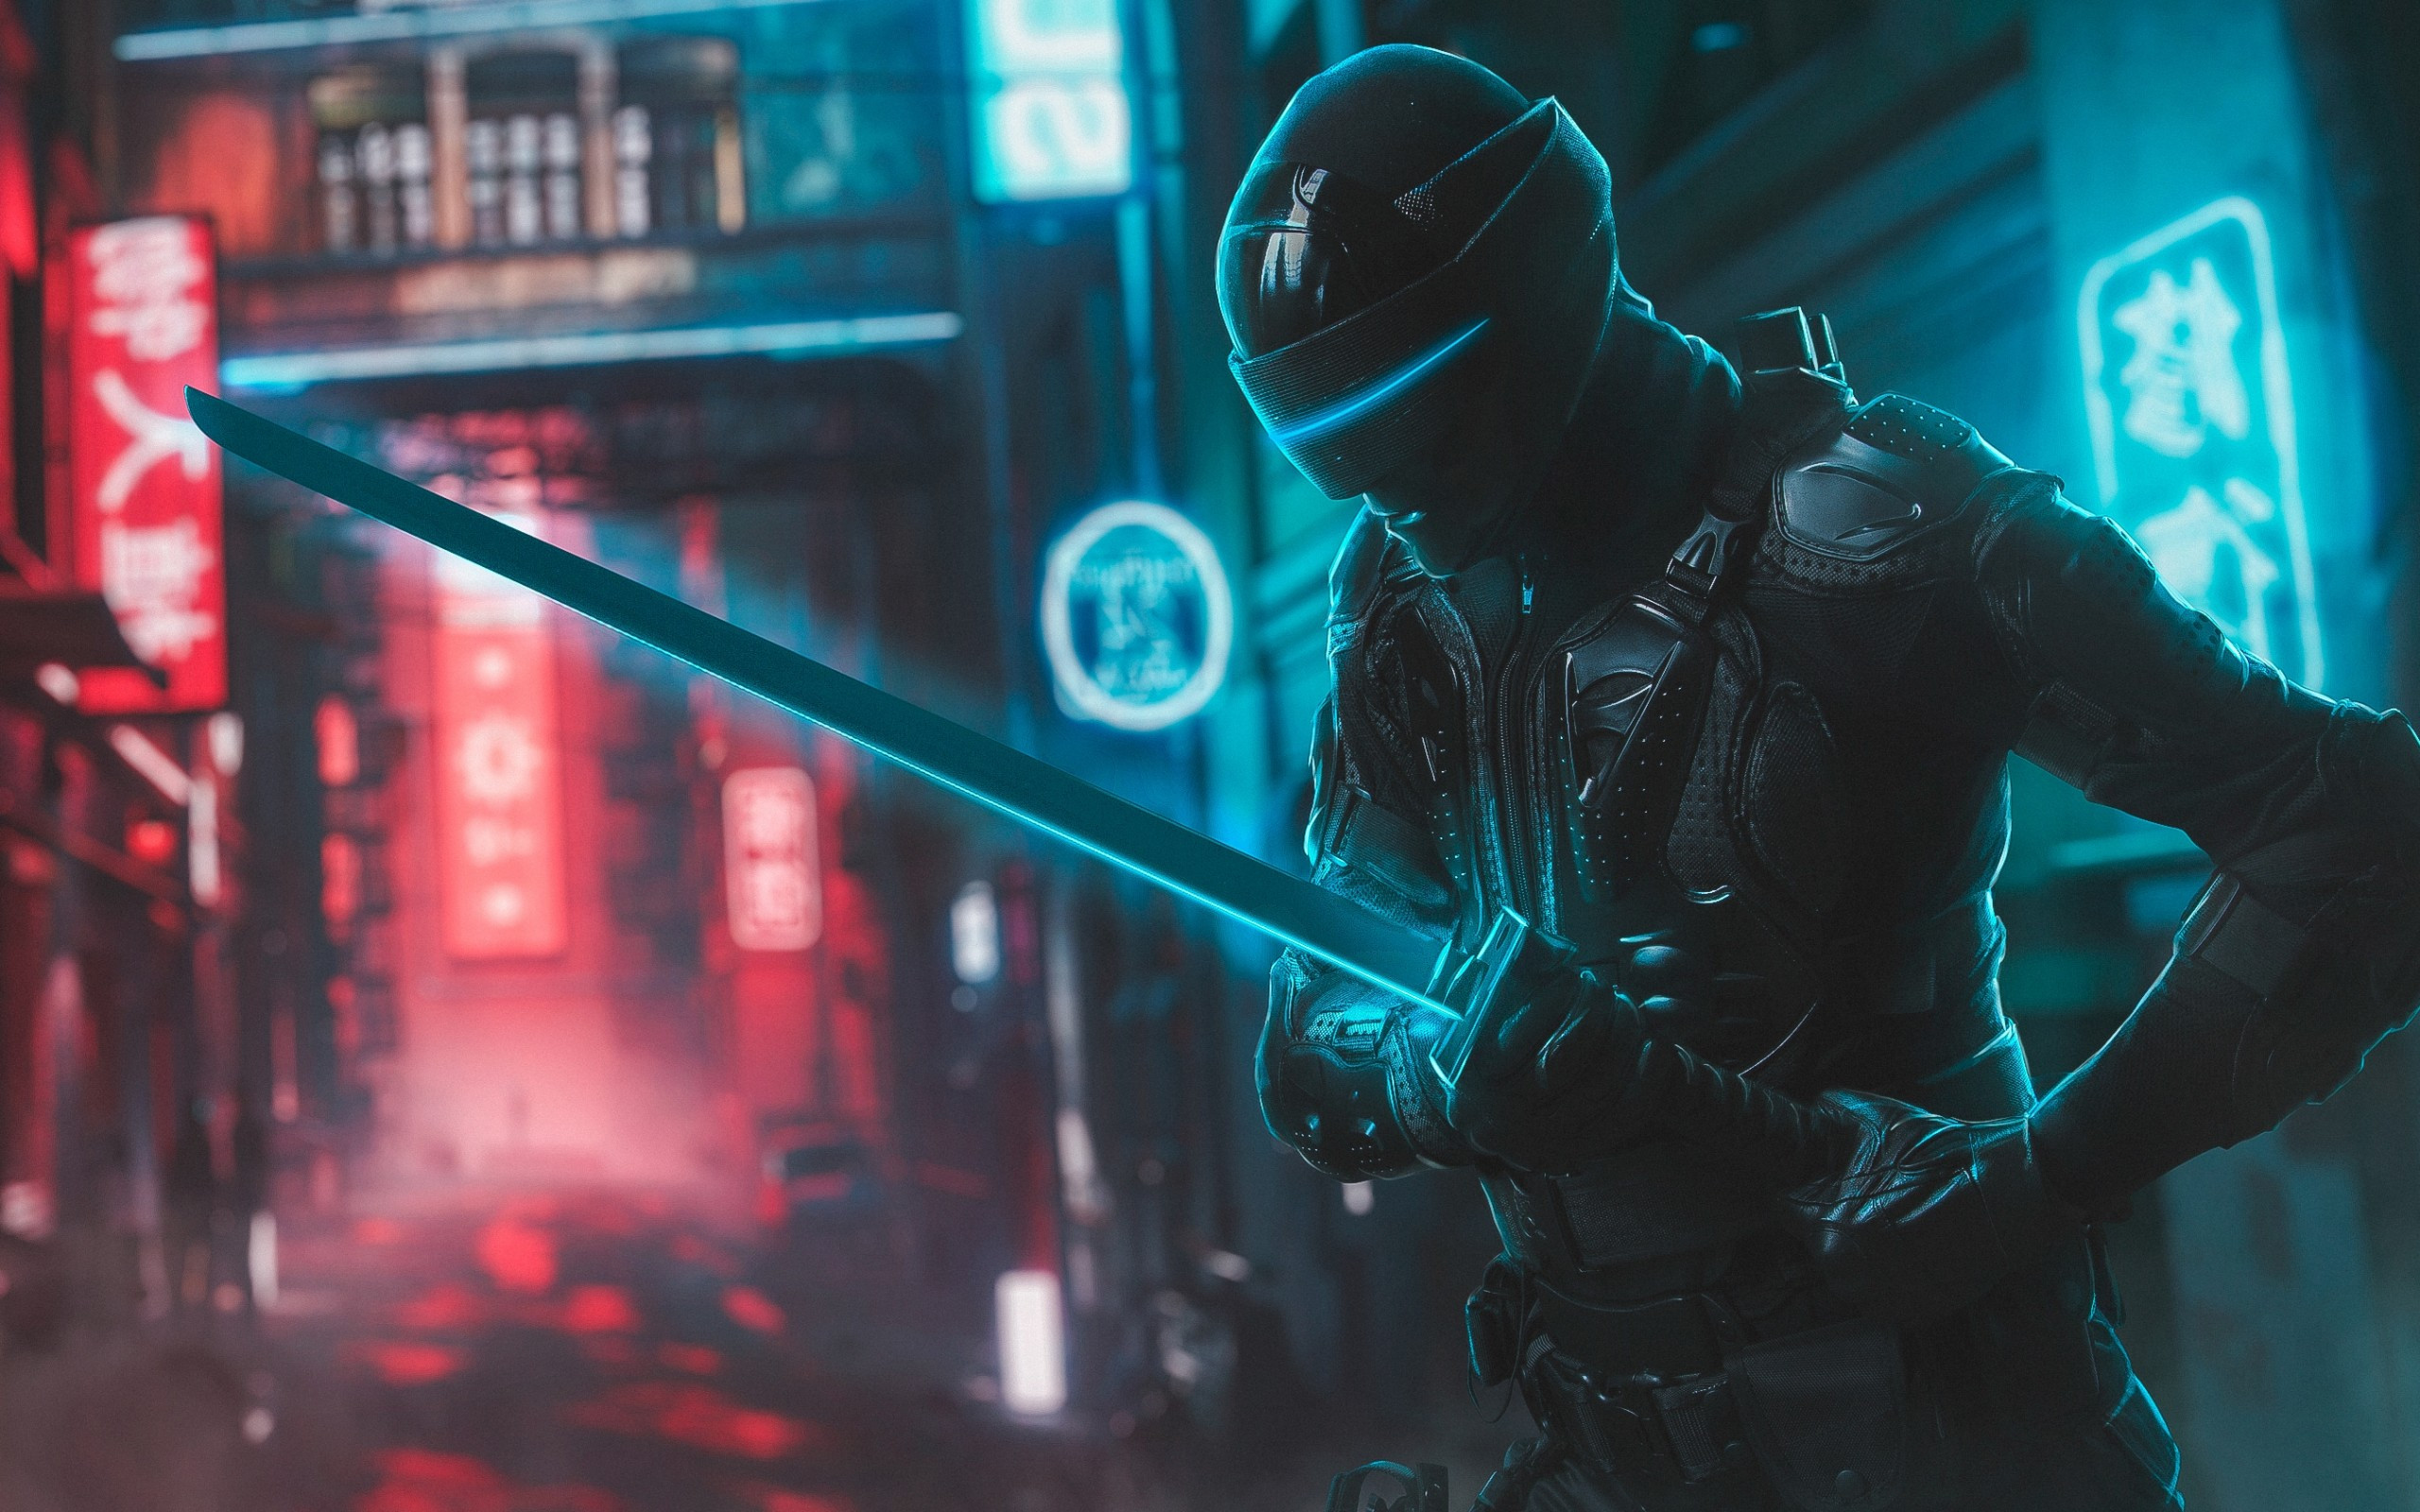 Download 2560x1600 Futuristic Character, Neon Streets, Sword, Mask Wallpaper for MacBook Pro 13 inch